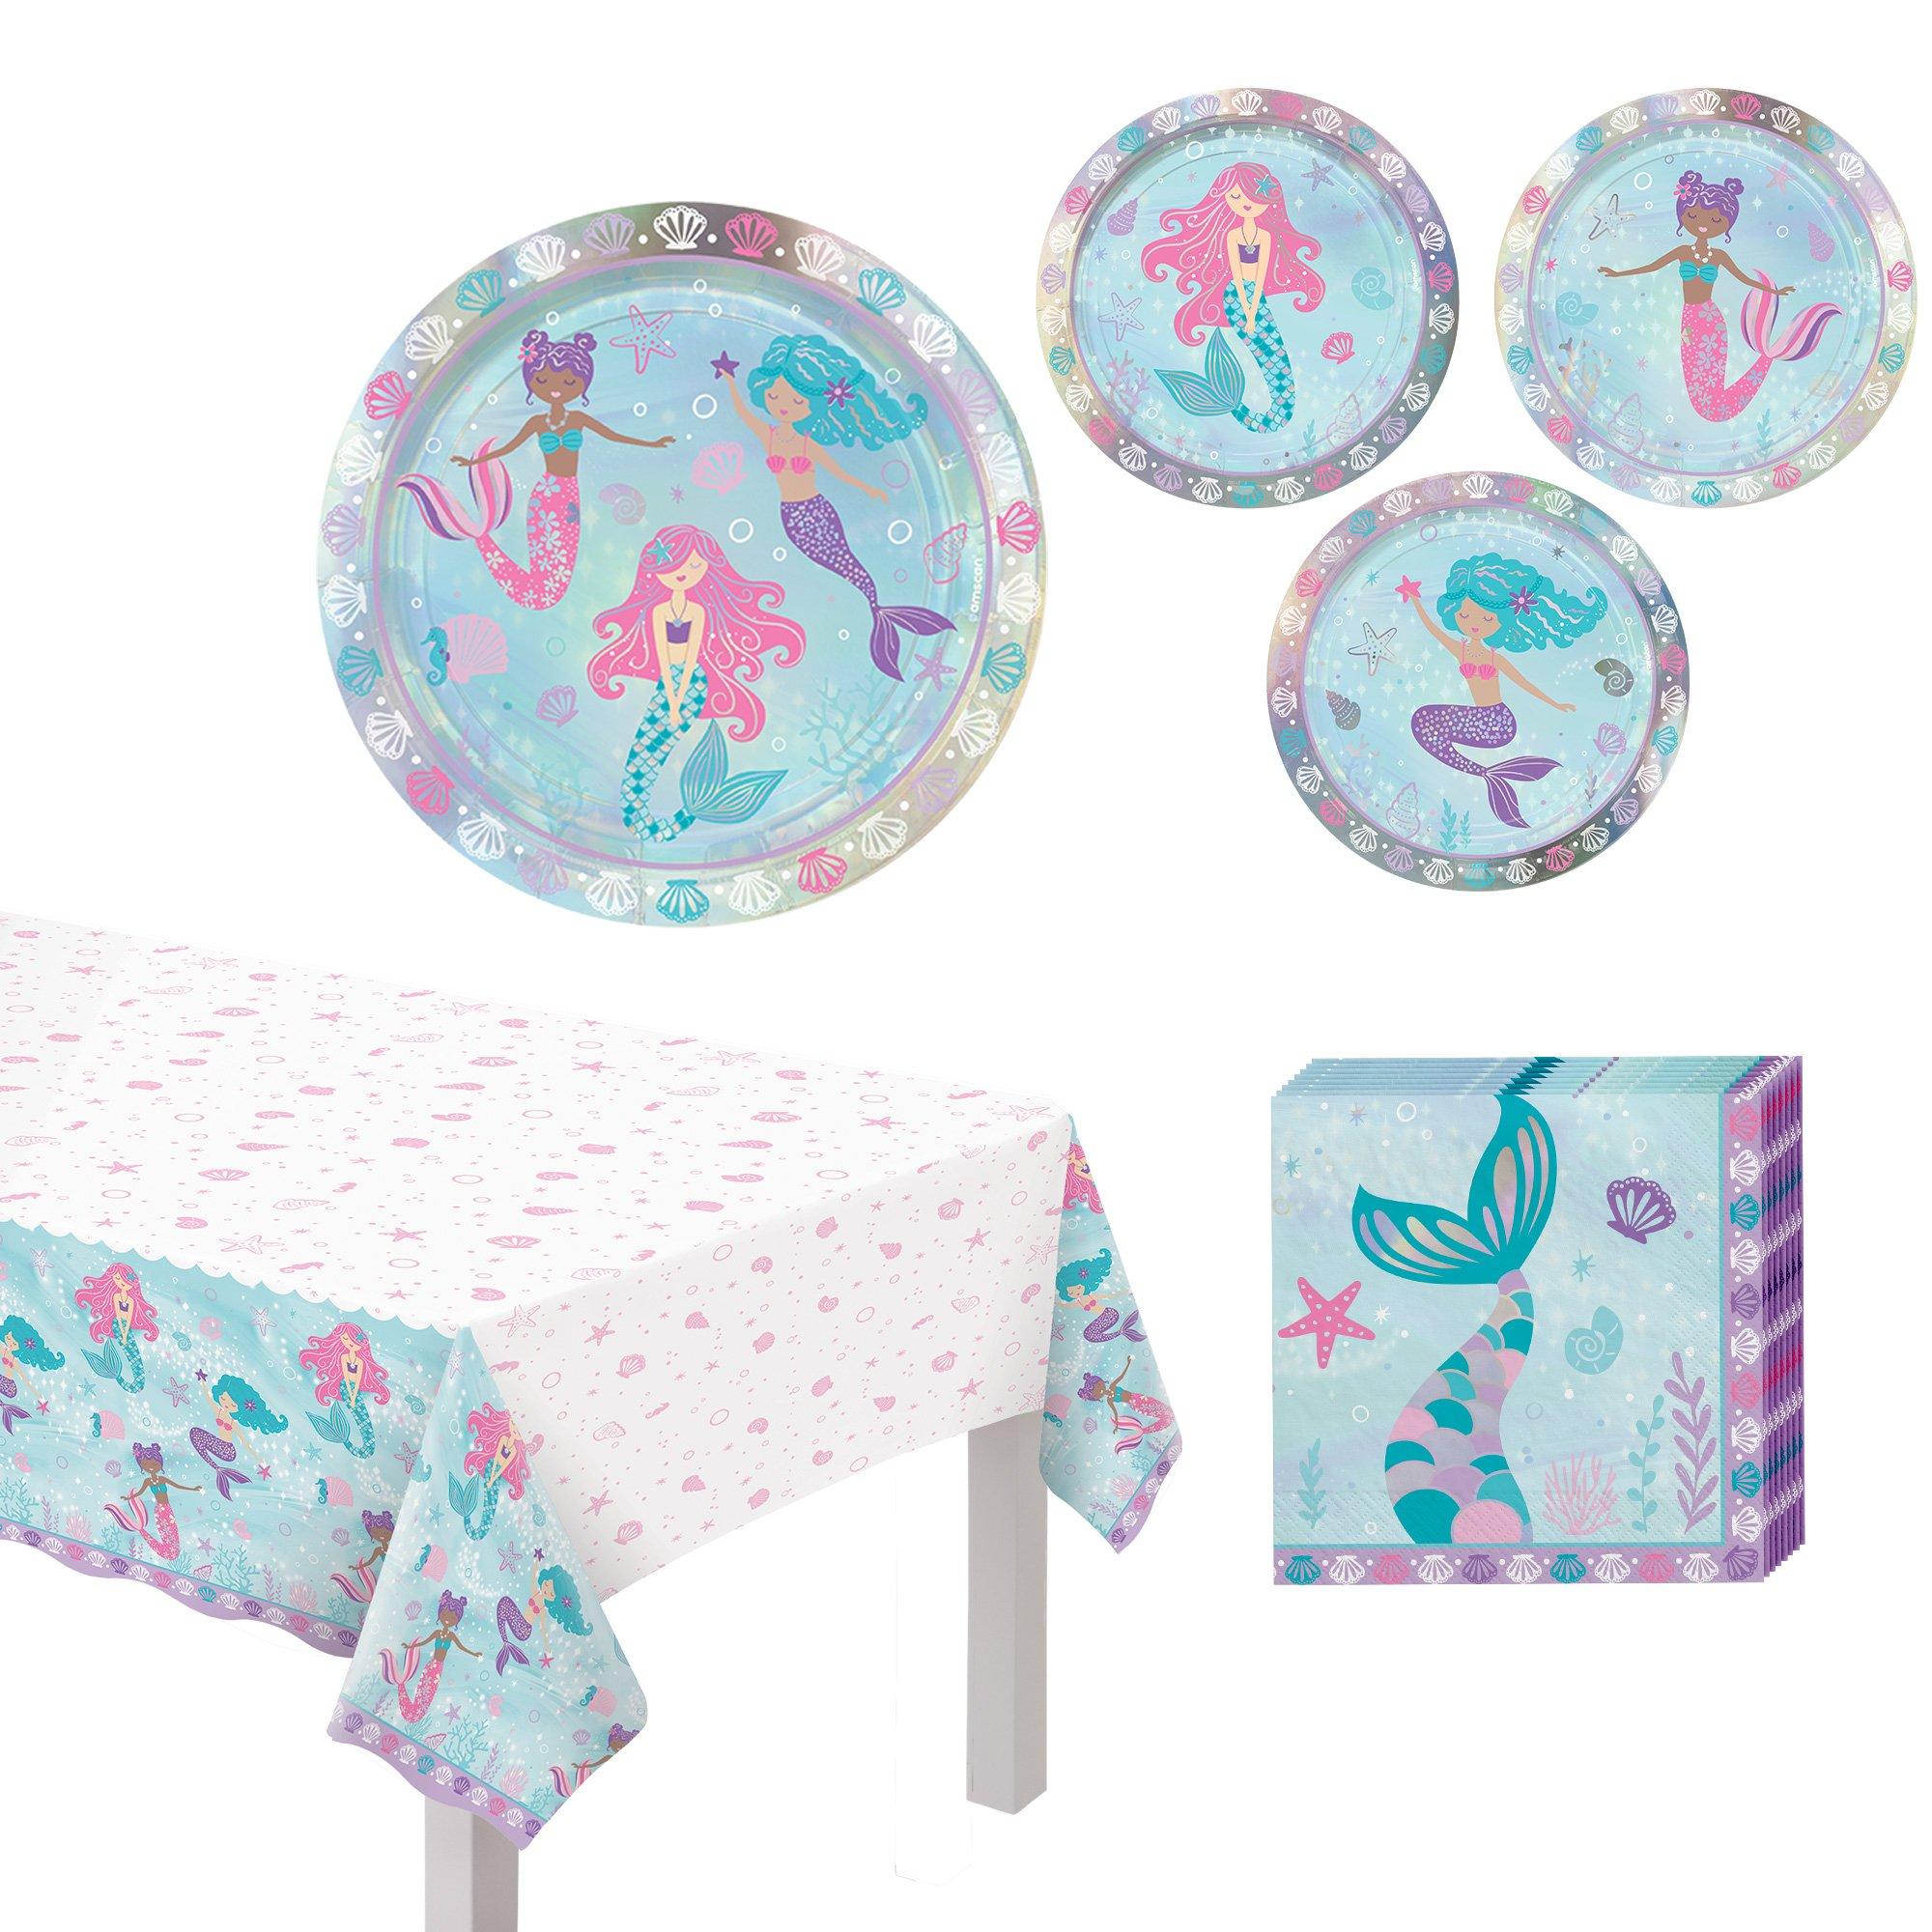 Shimmering Mermaids Party Supplies Pack for 8 Guests - Kit Includes Plates, Napkins & Table Cover